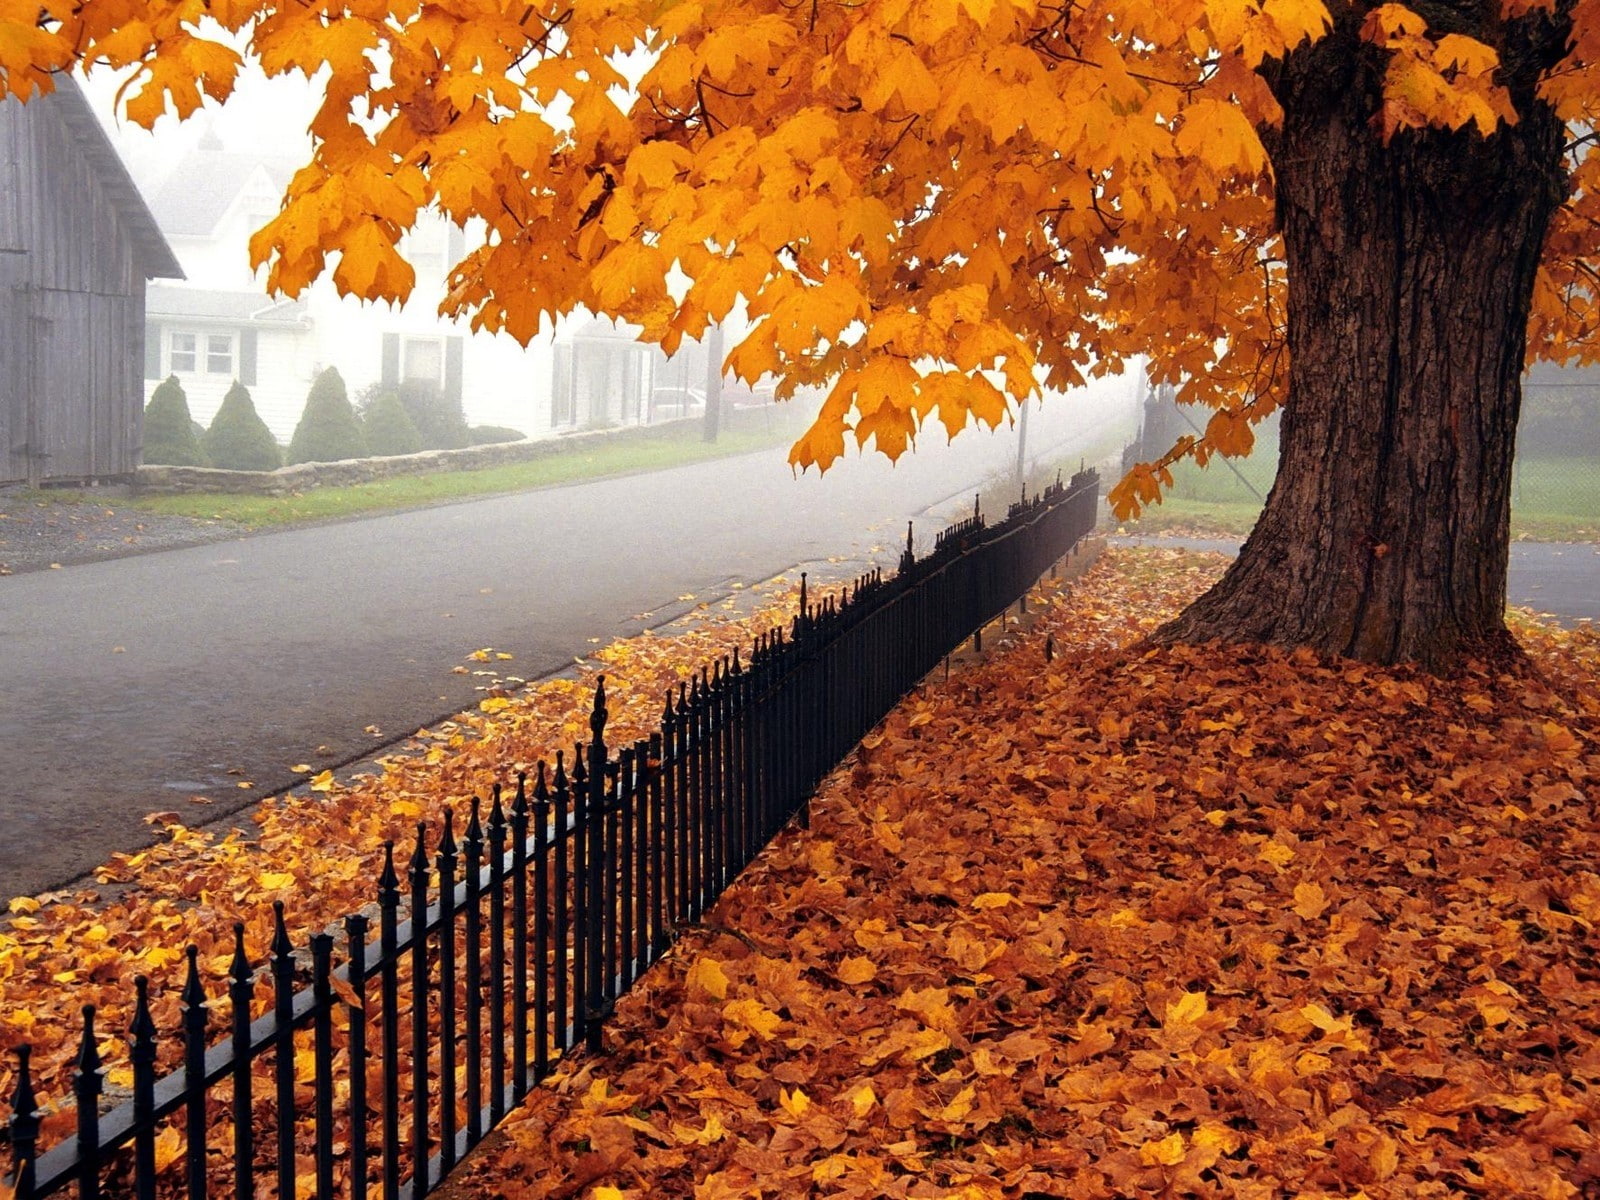 Autumn, Tree, Leaves, Fence, Fencing, West virginia, change